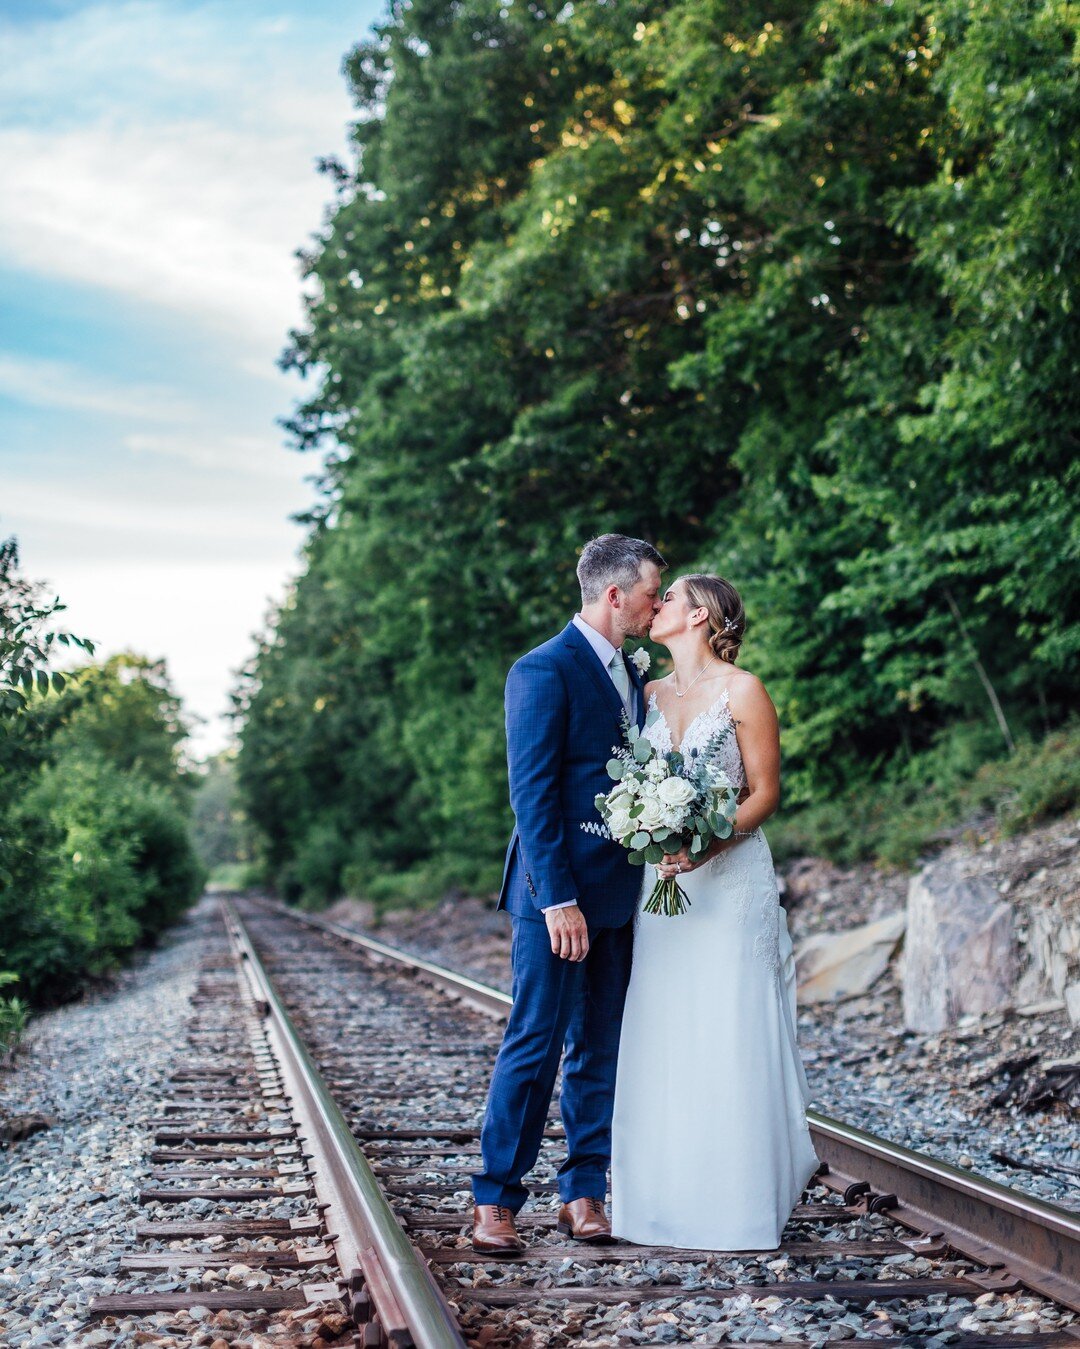 Casey and Chris planned their wedding for 2020, but had to get creative. They decided to split their wedding coverage between 2020 and 2021, with a smaller, more intimate ceremony with friends and family in 2020 and a bigger party with even more frie